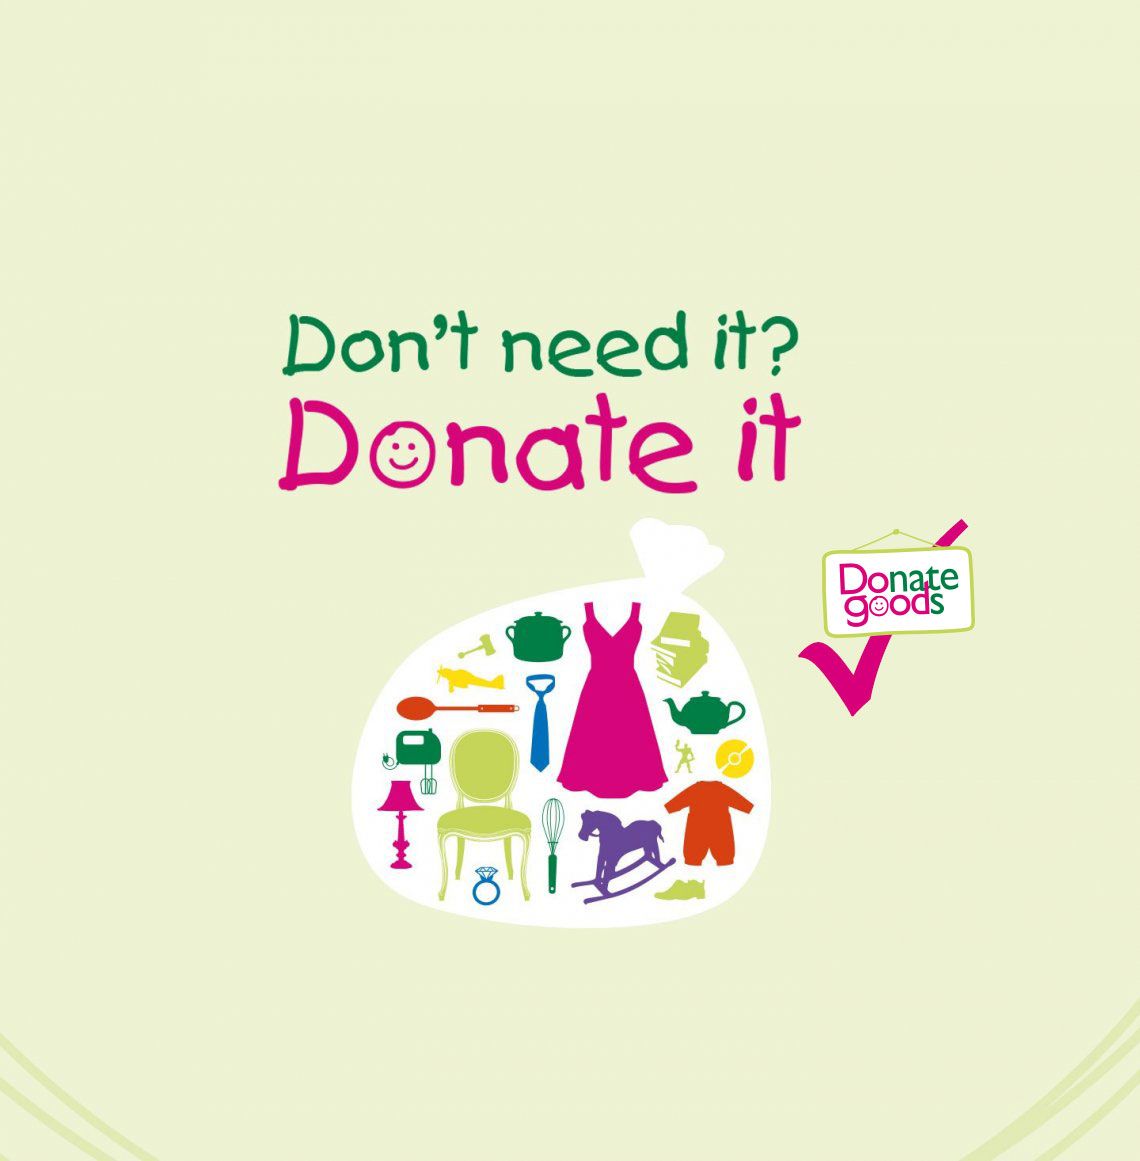 Donate your unwanted items to Children's Hospice South West